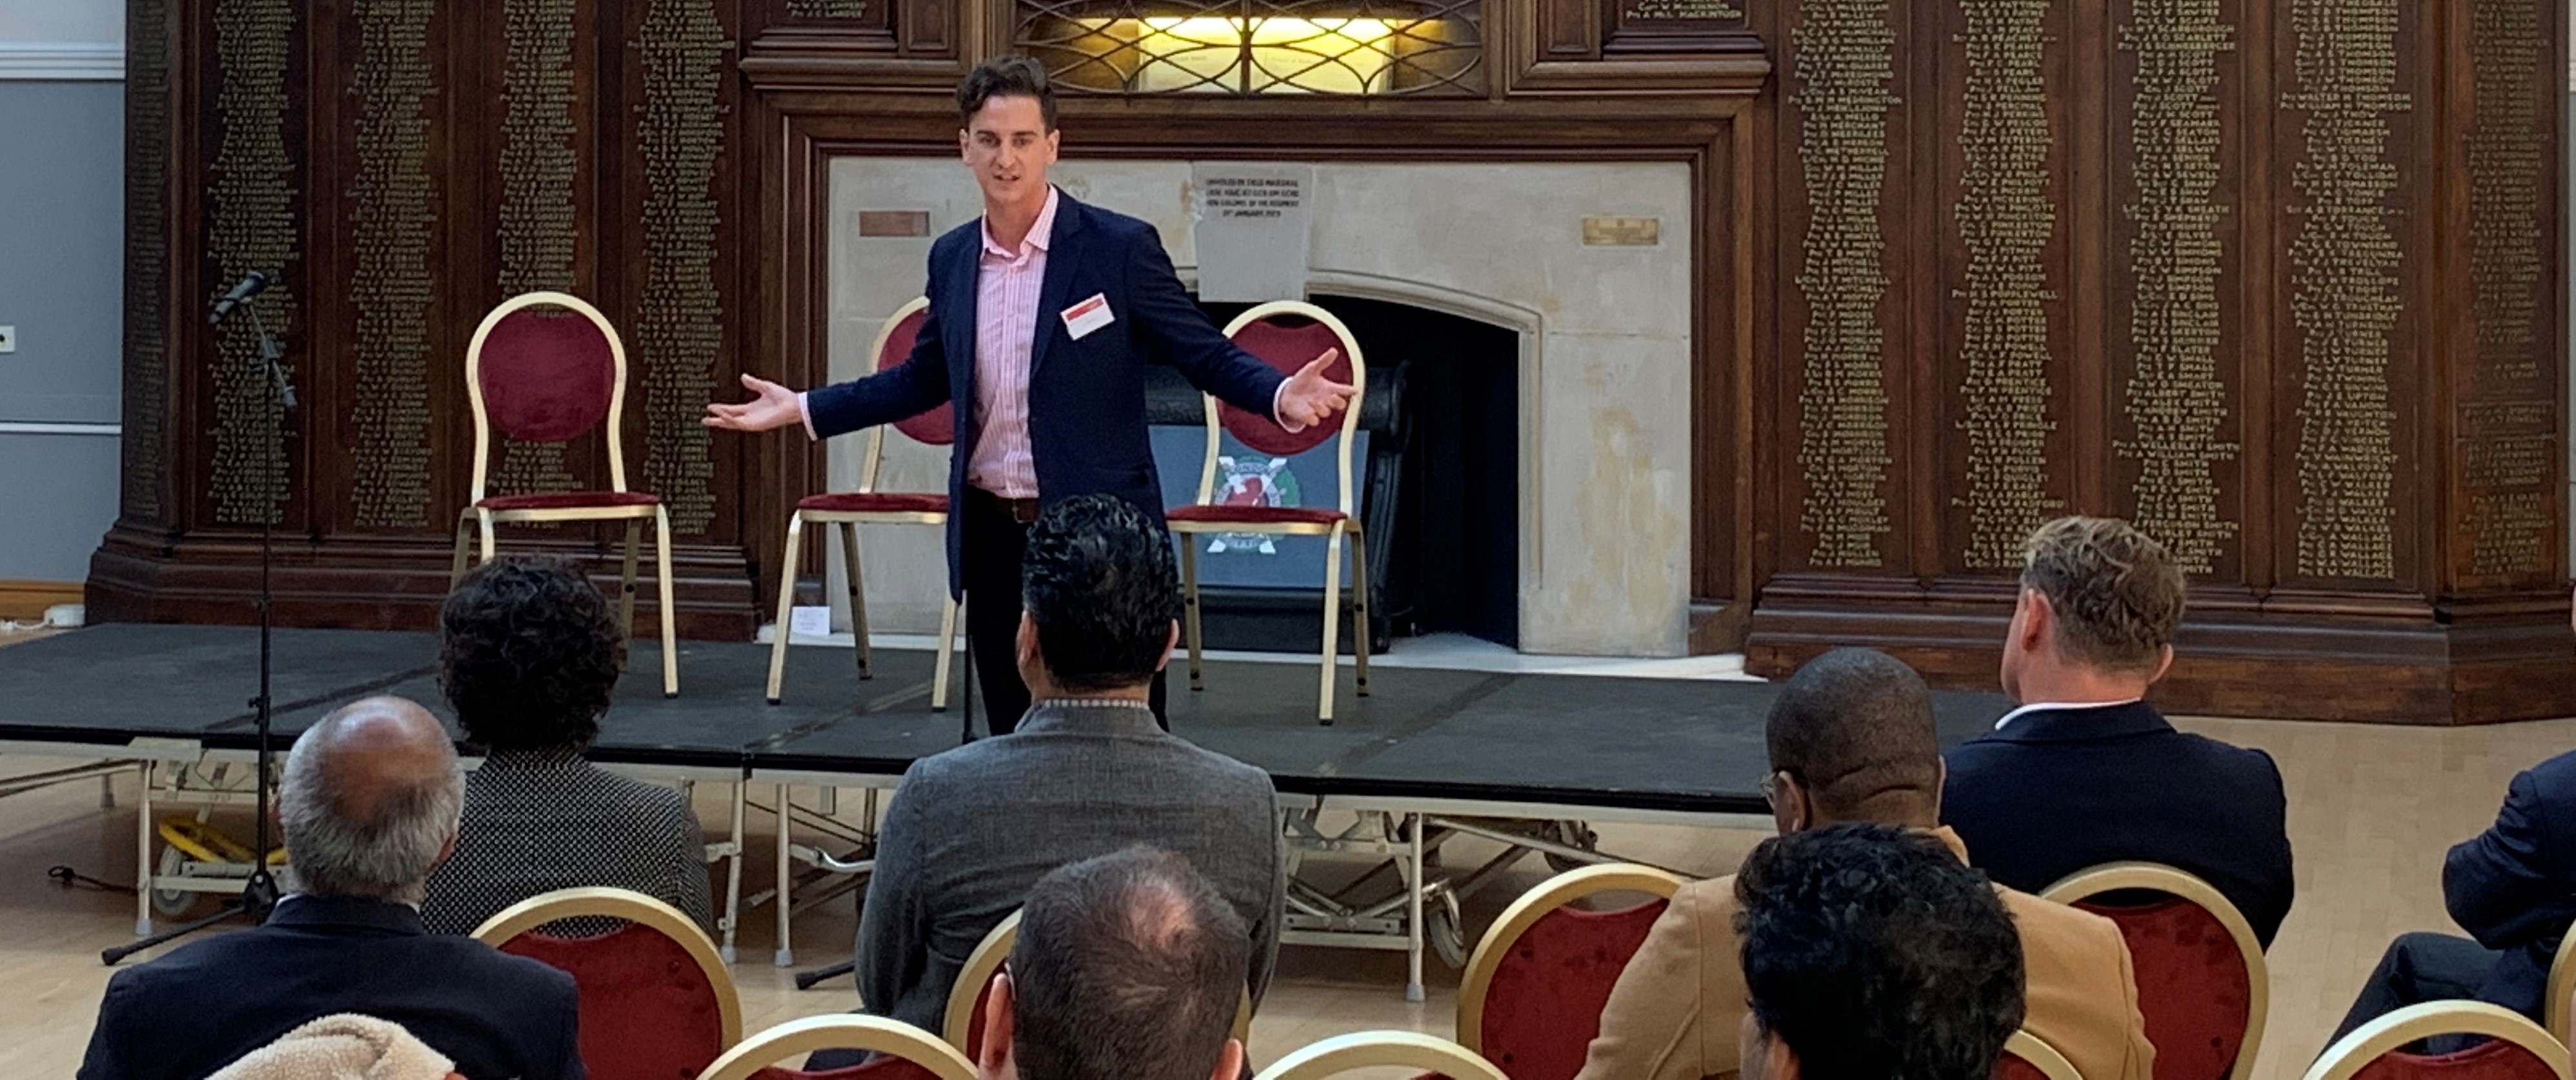 GEP Event - Presentation by Nathan Lawes, Innovate Edge UK at Inspire, Inform, Reconnect, 29 Sept 2021